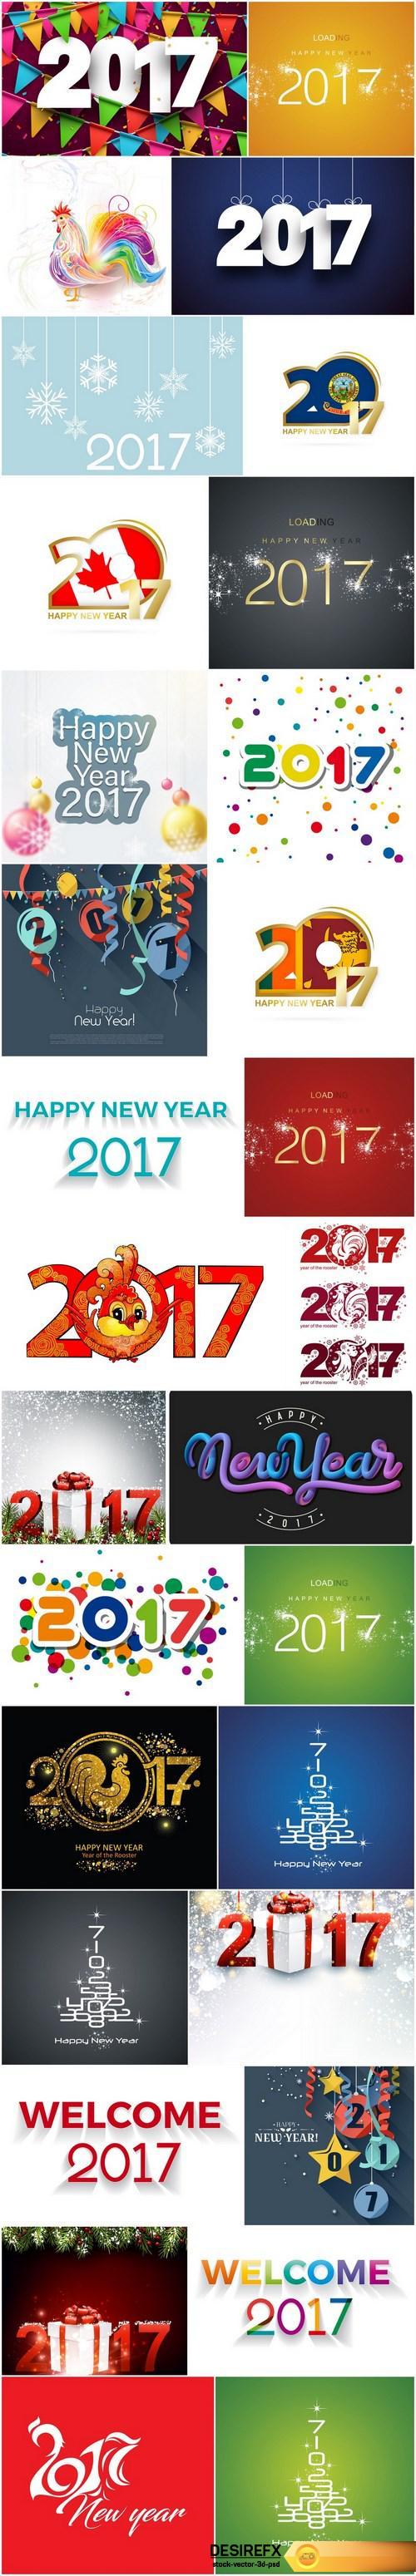 New Year Design 2017 part 8 – Set of 30xEPS Professional Vector Stock